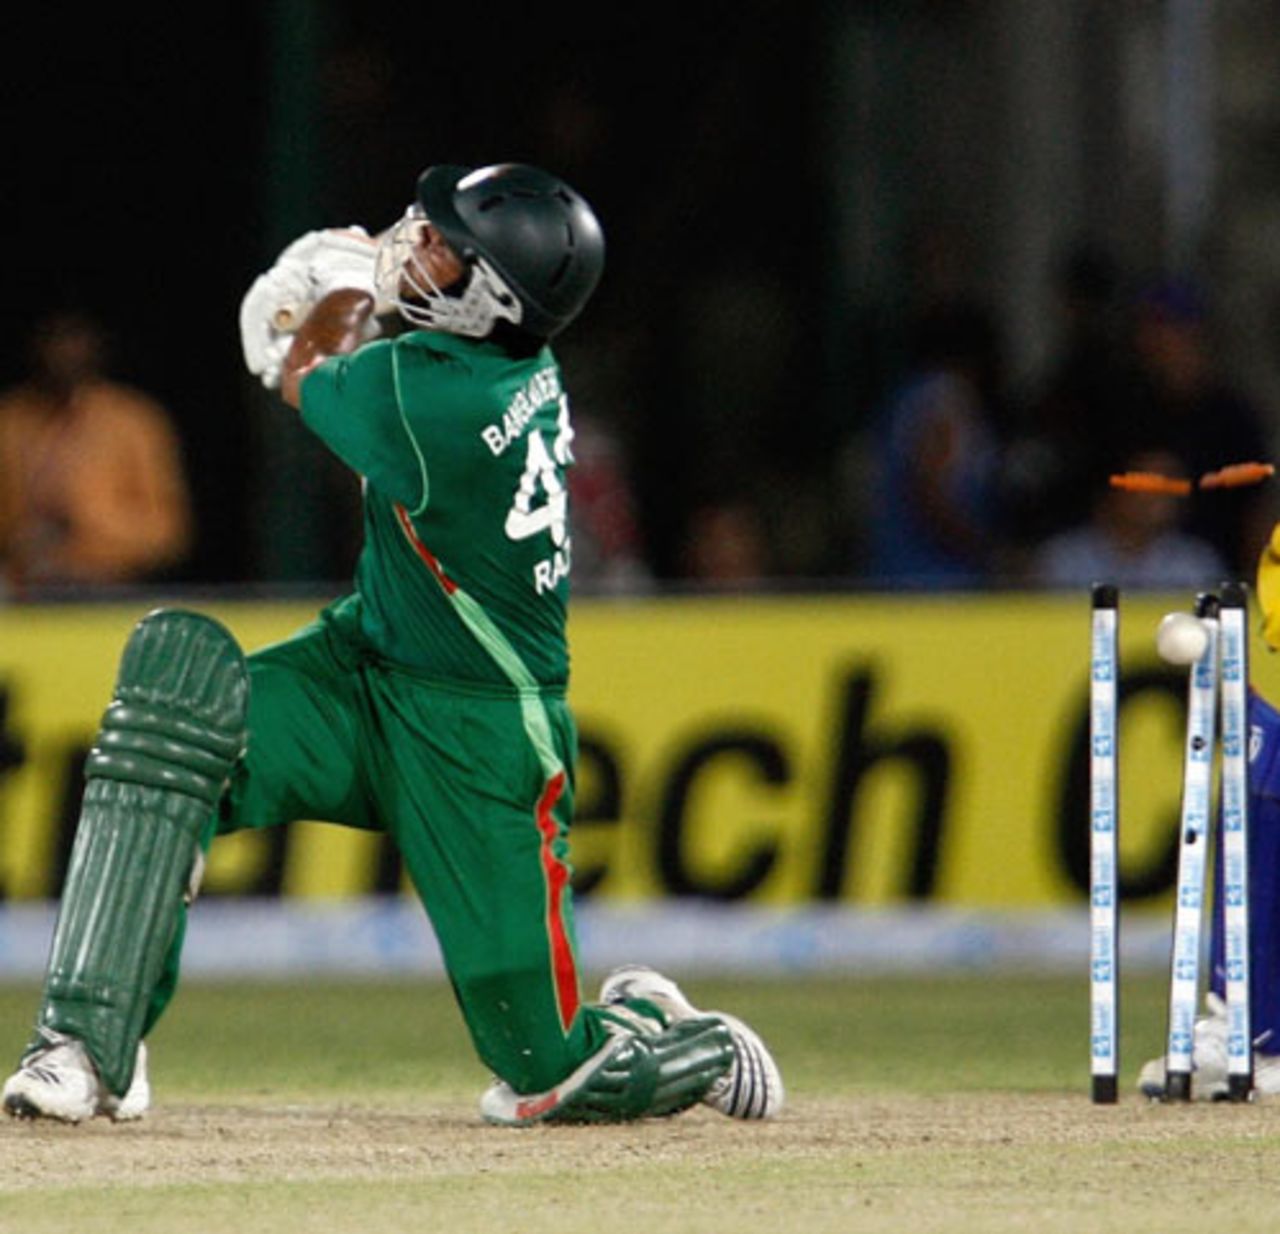 Abdur Razzak was bowled after his attempted swipe didn't connect with the ball, Bangladesh v Sri Lanka, Super Four, Asia Cup, Karachi, June 30, 2008